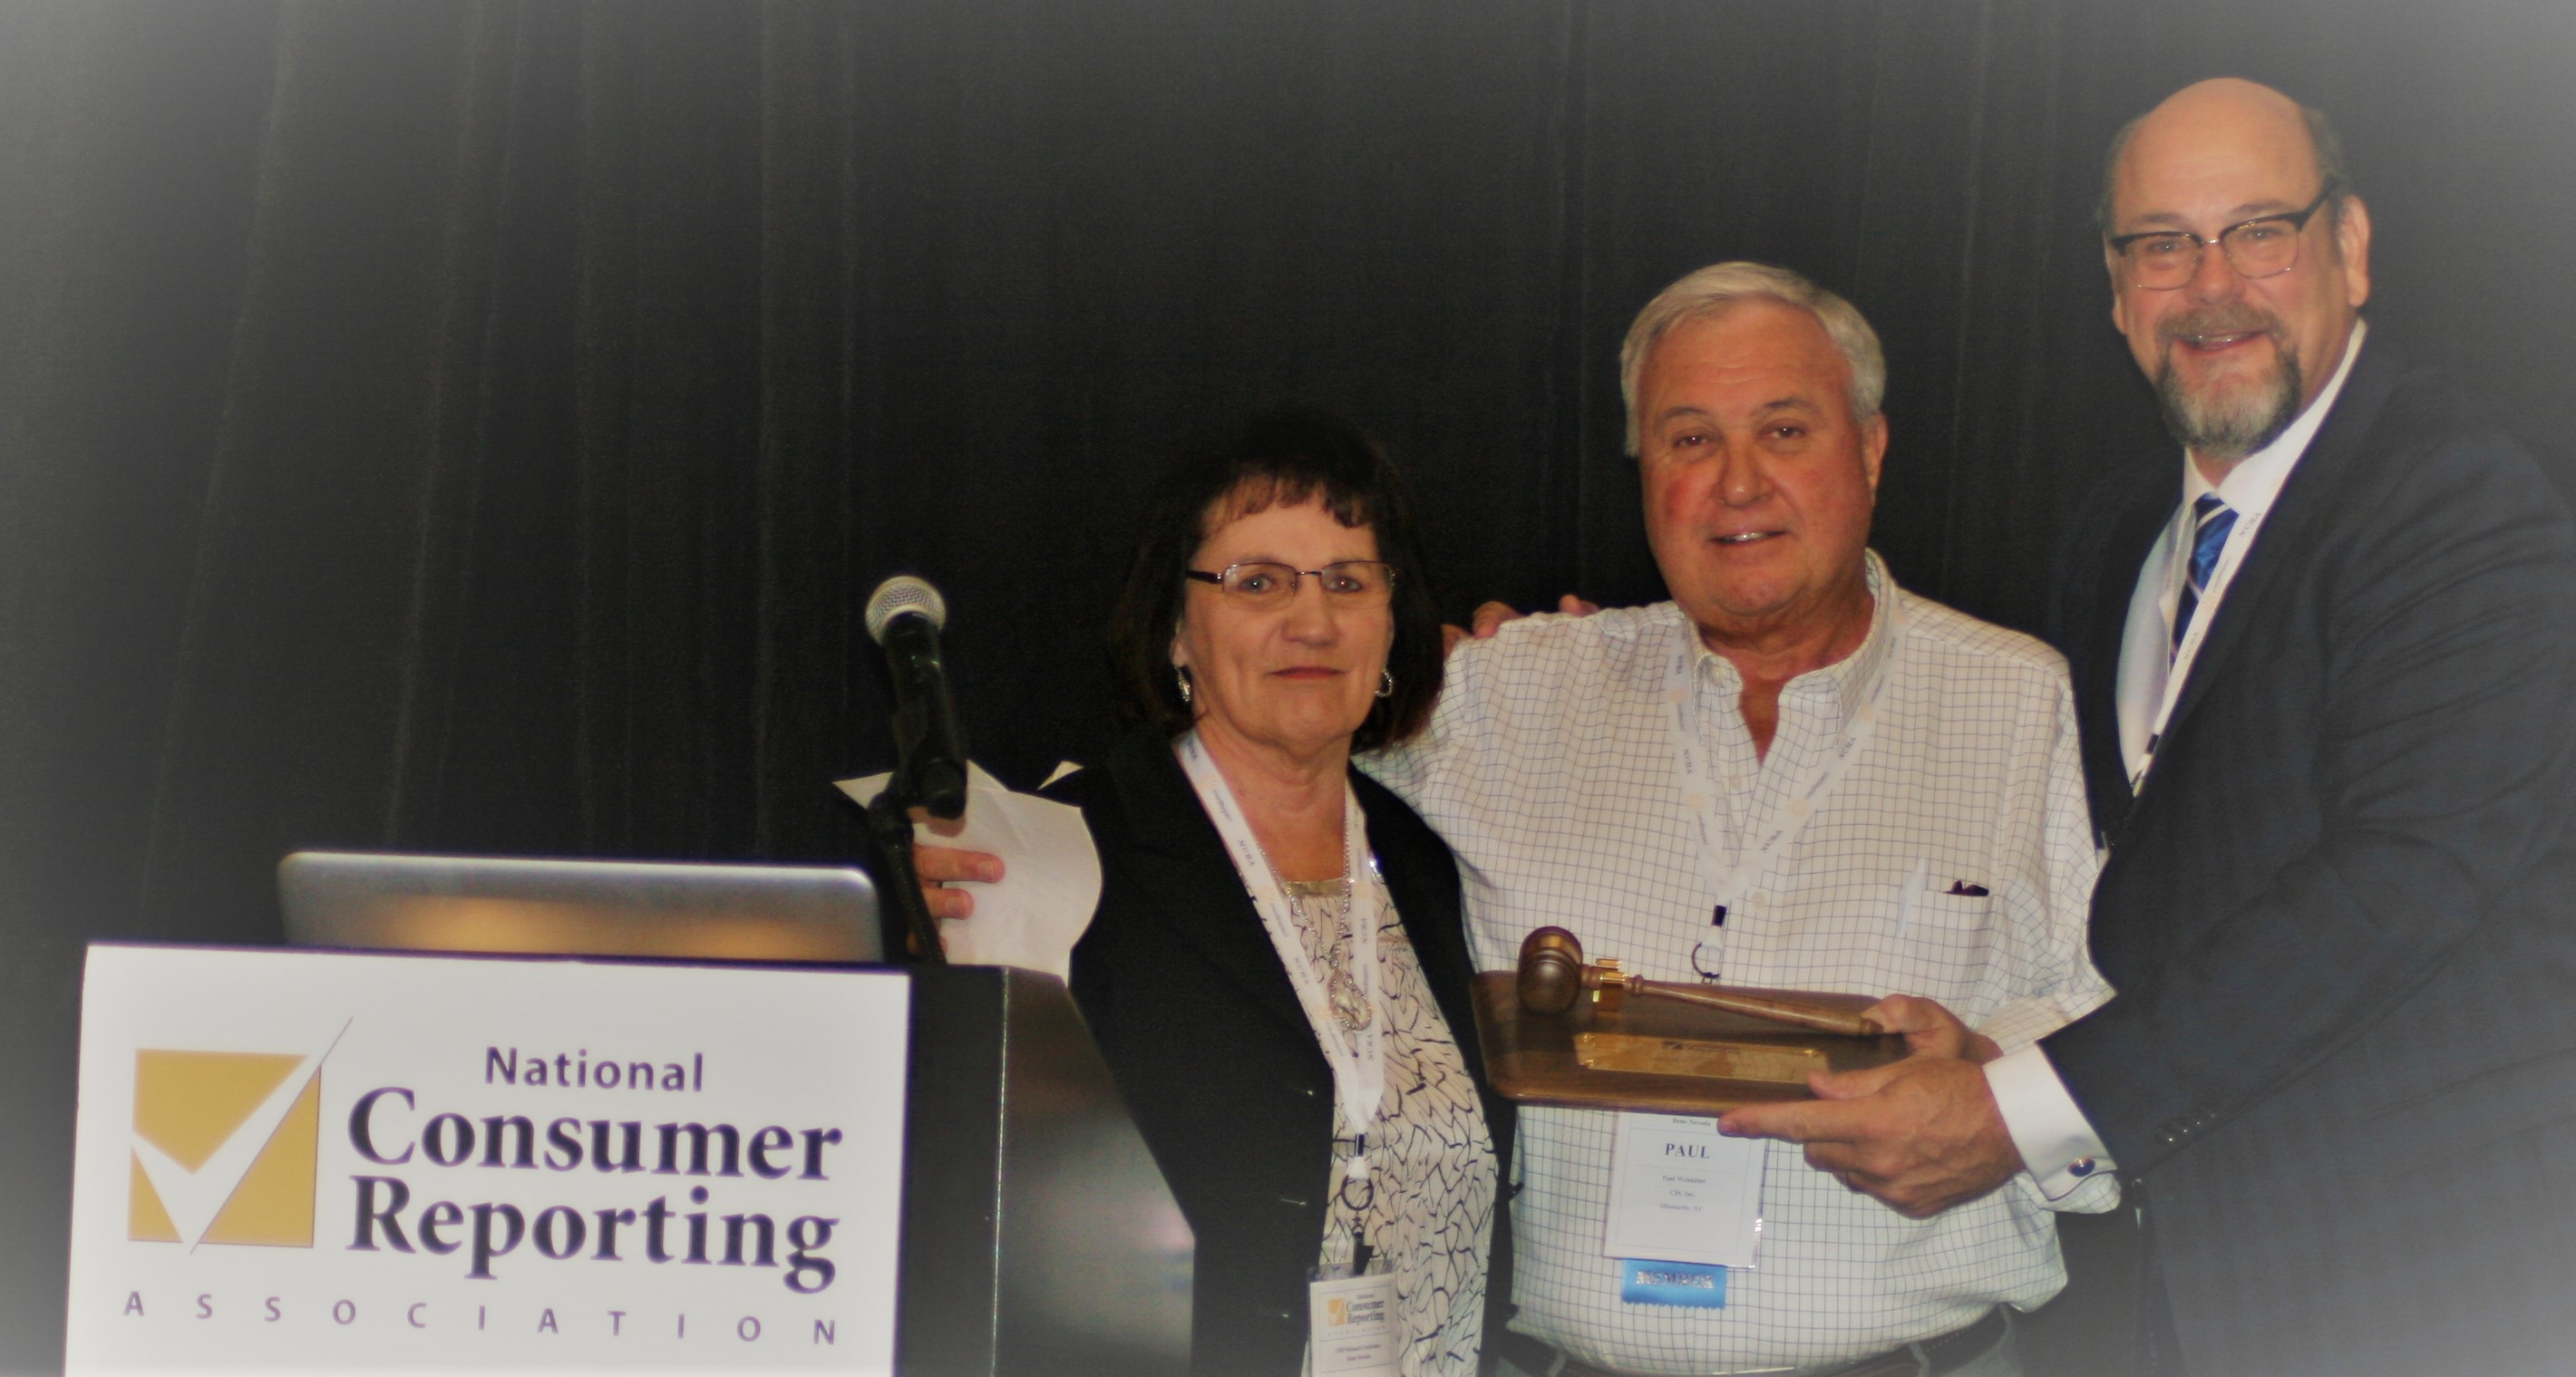 NCRA changed leadership at its Annual Conference as Executive Director Terry Clemans (right) passes the gavel of leadership from NCRA 2018 President Paul Wohkittel (center) to 2019 President Mary Campbell (left)